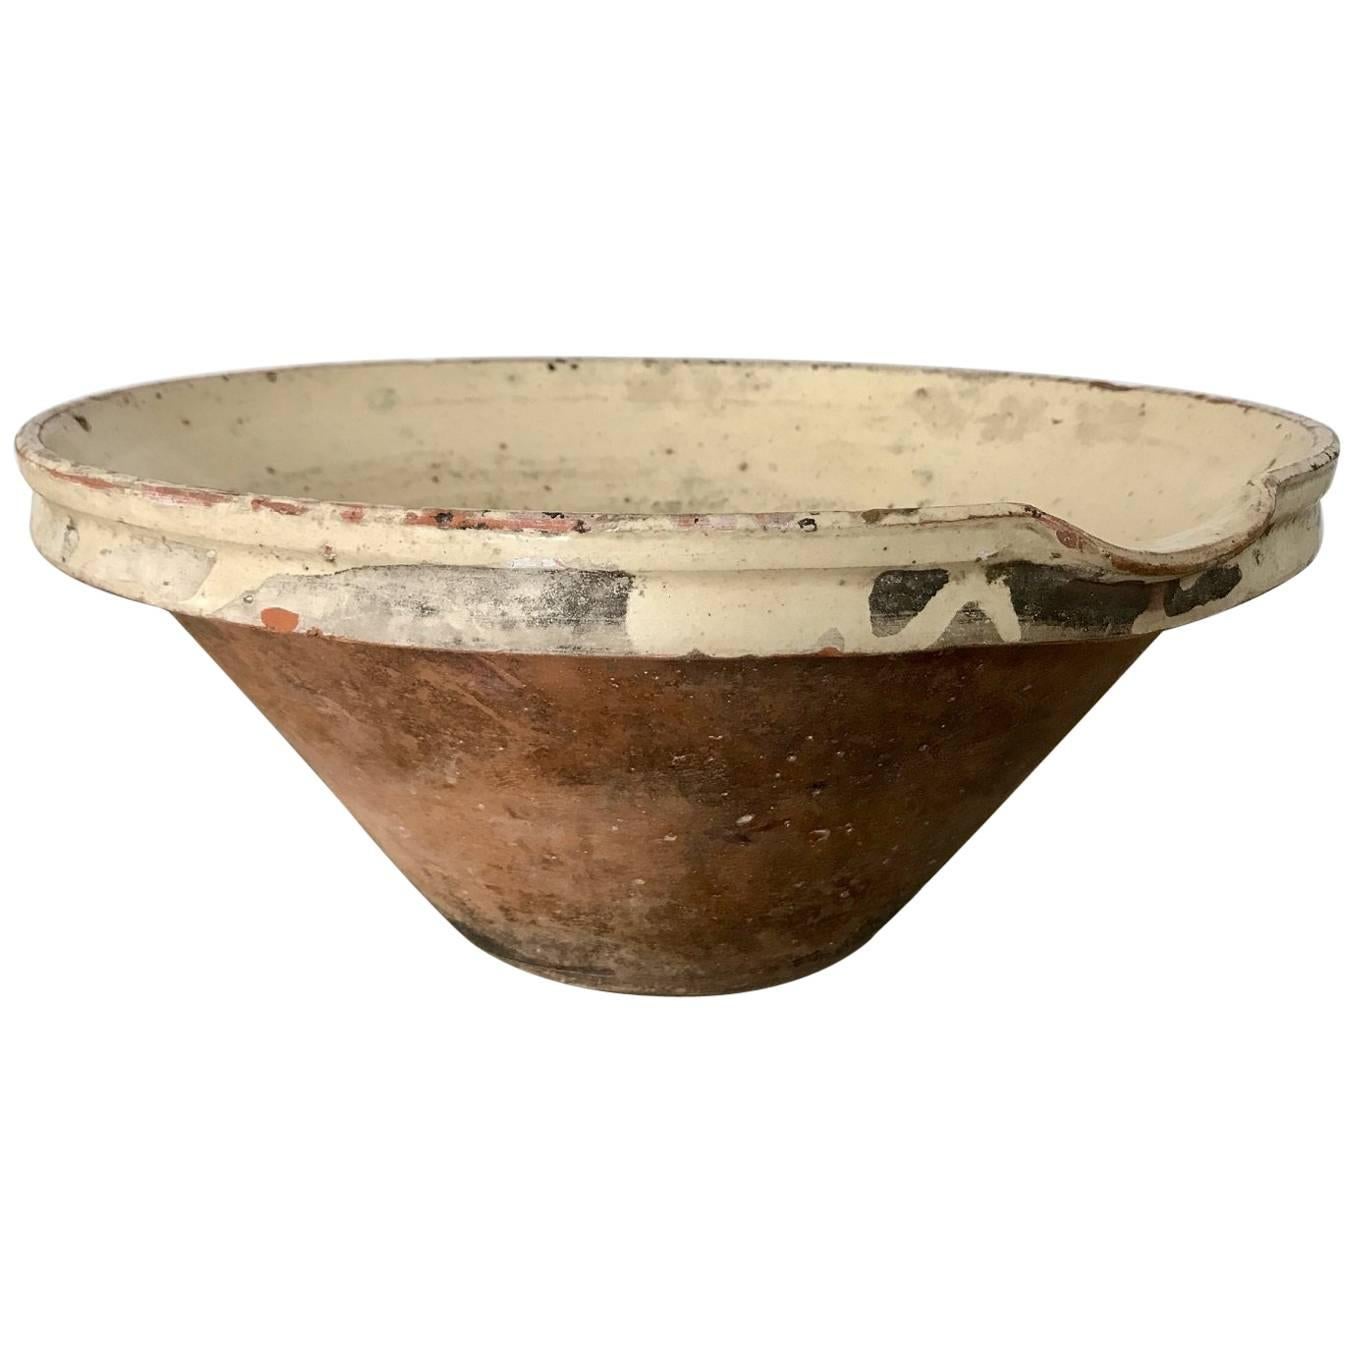 Antique French Earthenware Tian Bowl, Mid-19th Century For Sale